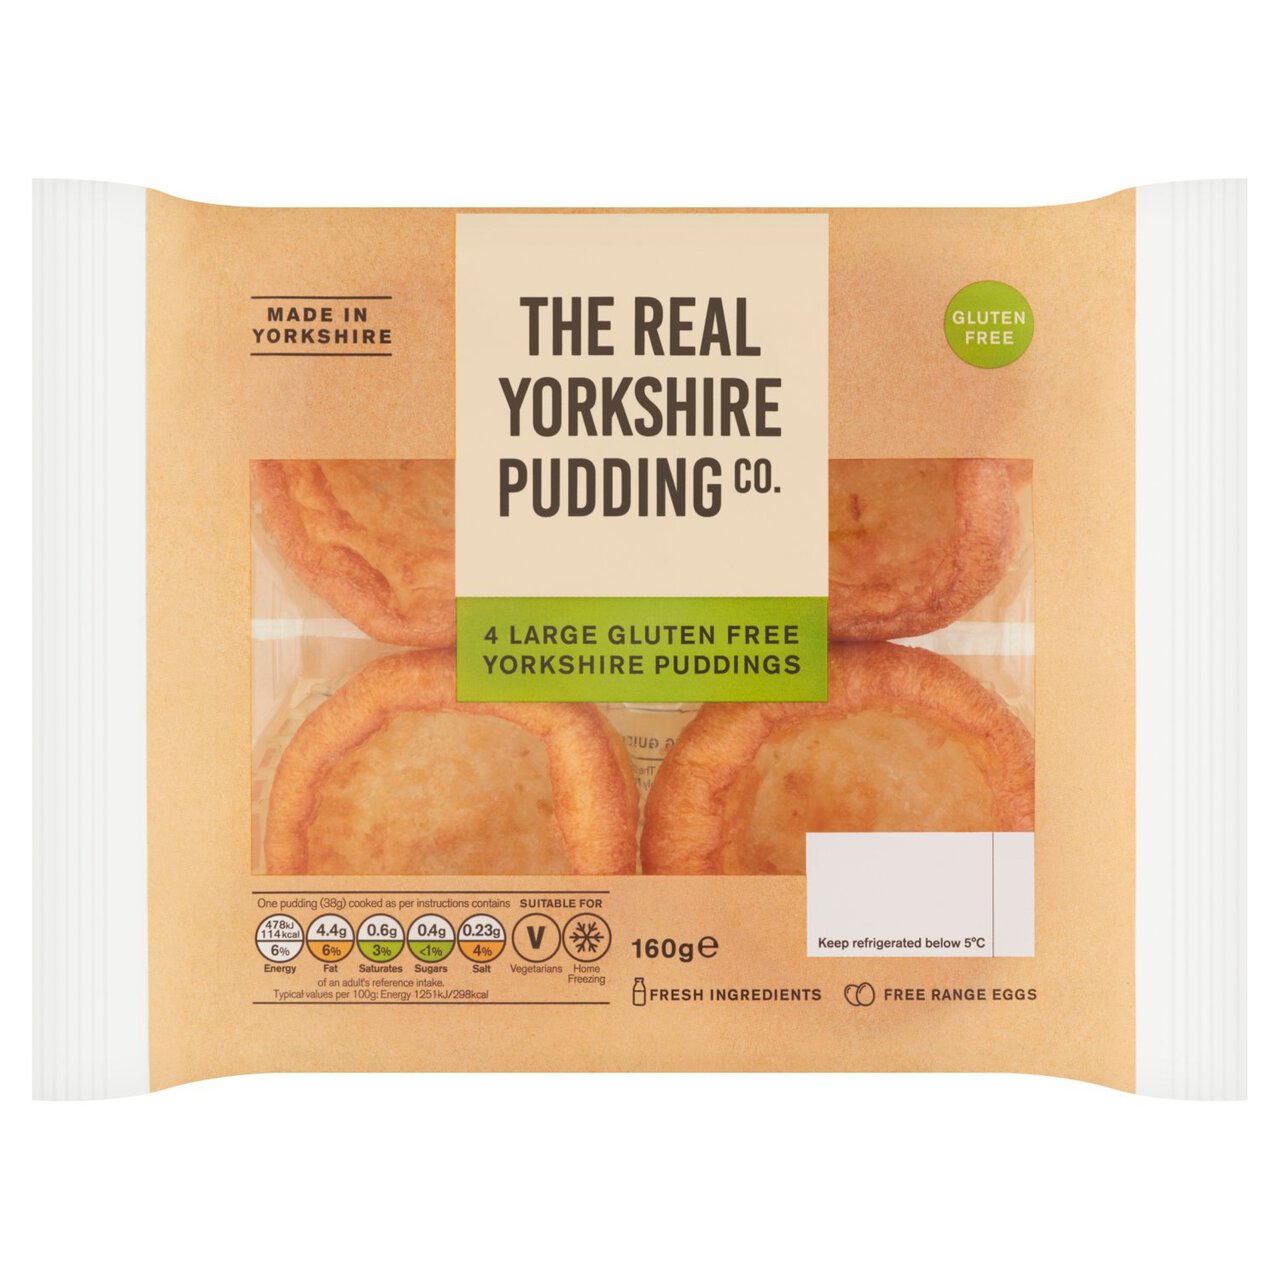 The Real Yorkshire Pudding Co. 4 Large Gluten Free Yorkshire Puddings 160g